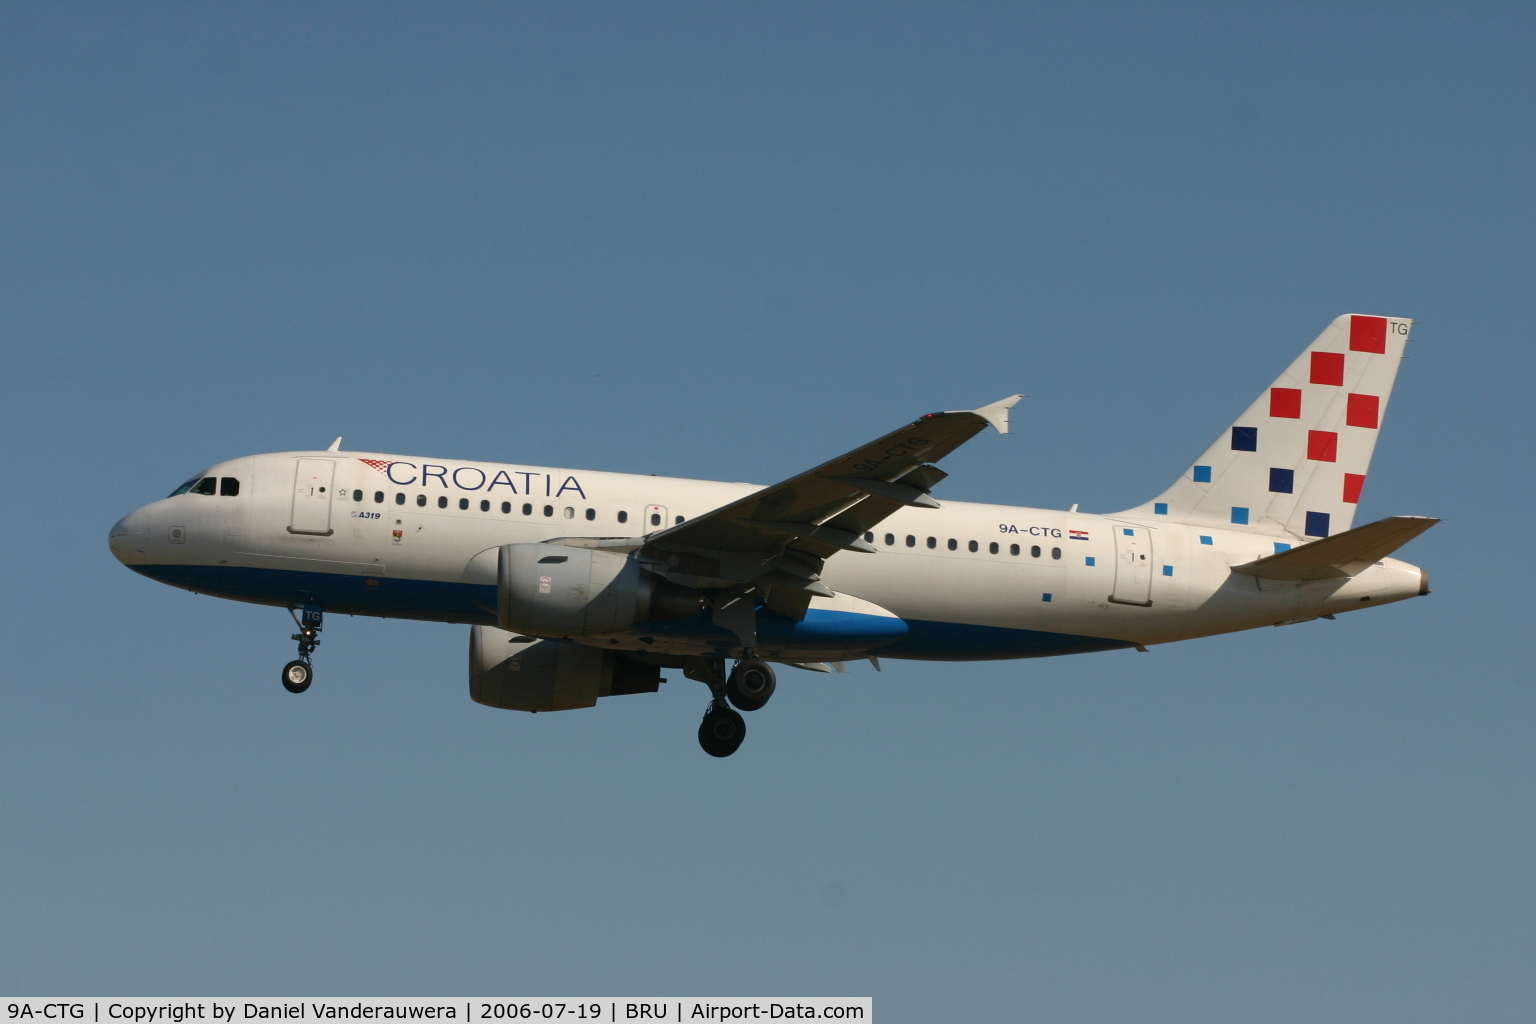 9A-CTG, 1998 Airbus A319-112 C/N 767, arrival of flight OU456 from ZAGREB